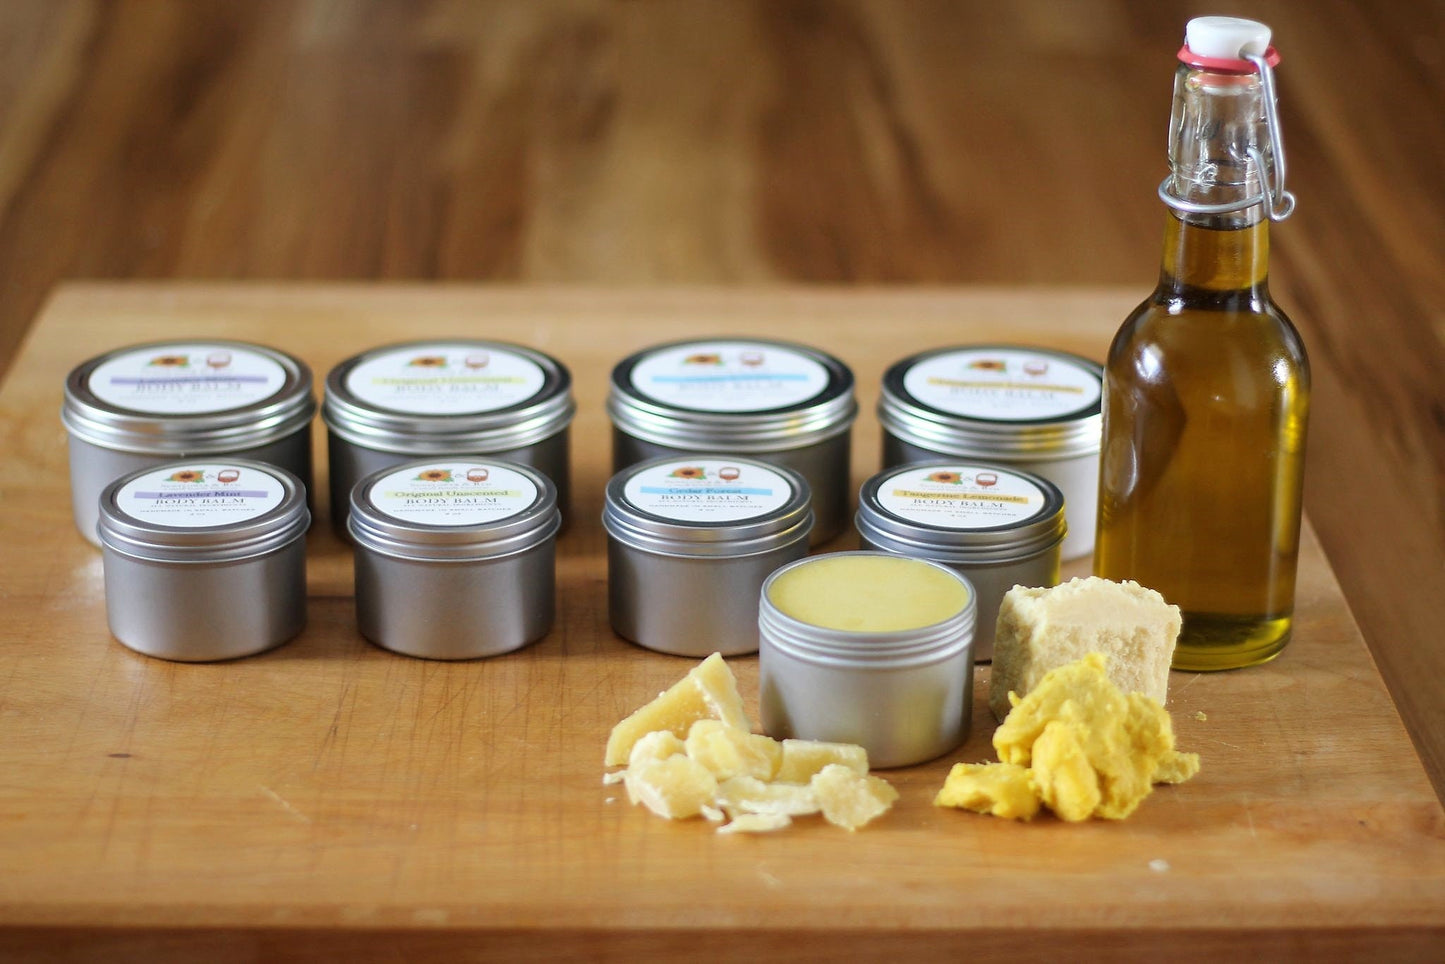 Beeswax Body Balm Lavender Peppermint